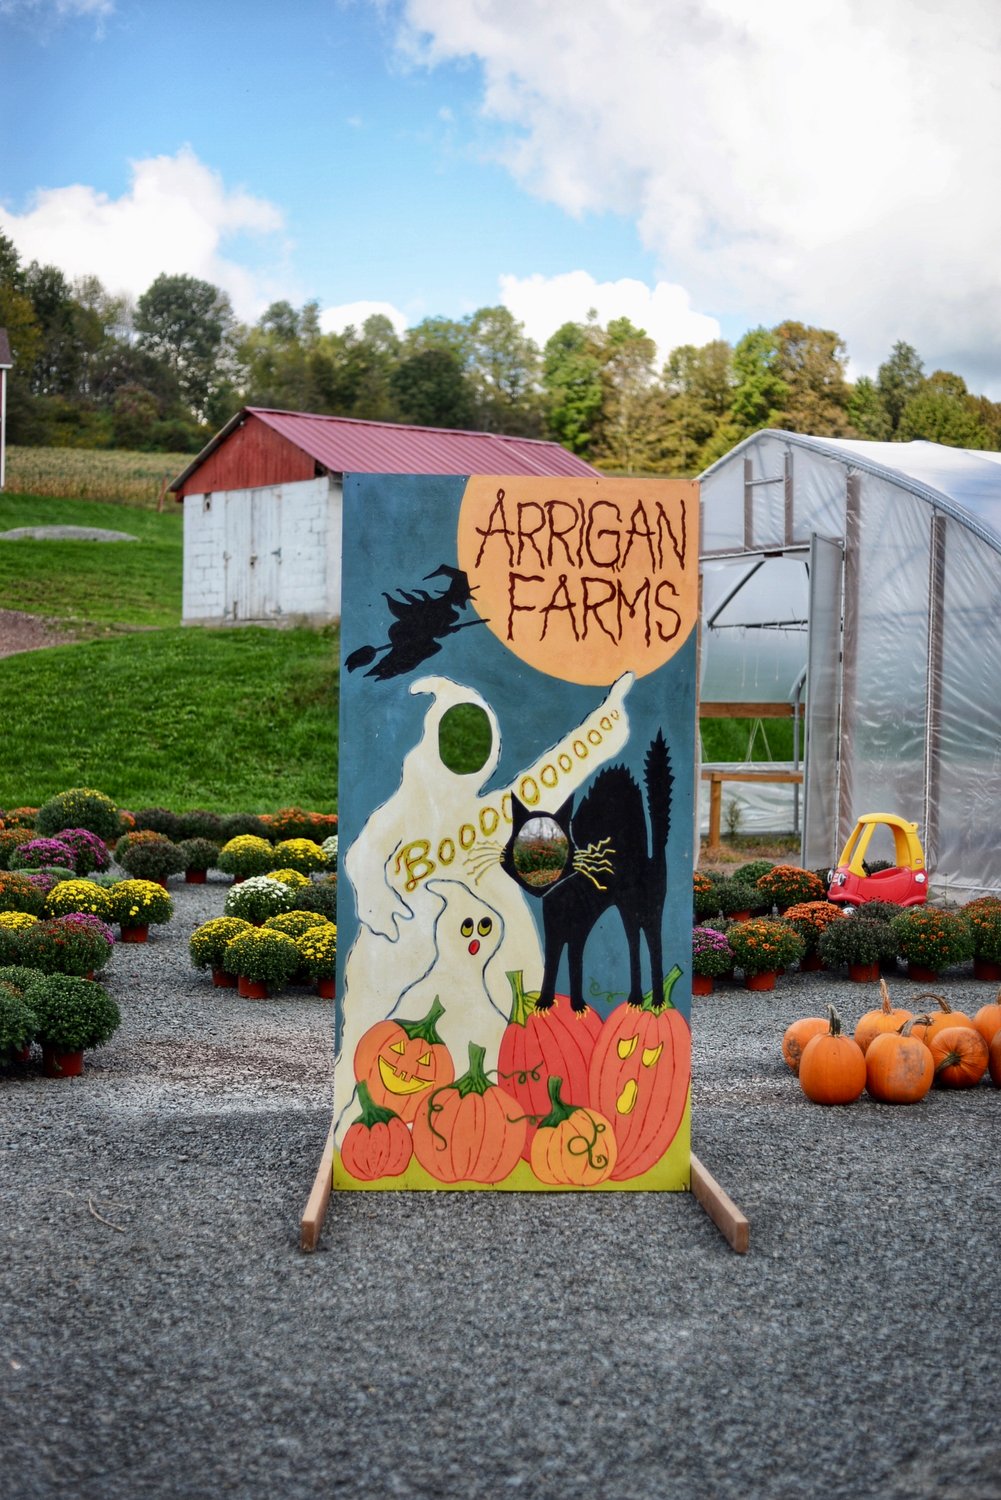 While you’re at the farm stand, be sure to take your picture! Don’t forget to tag your favorite farmer on social media! Every tag helps support your local businesses.